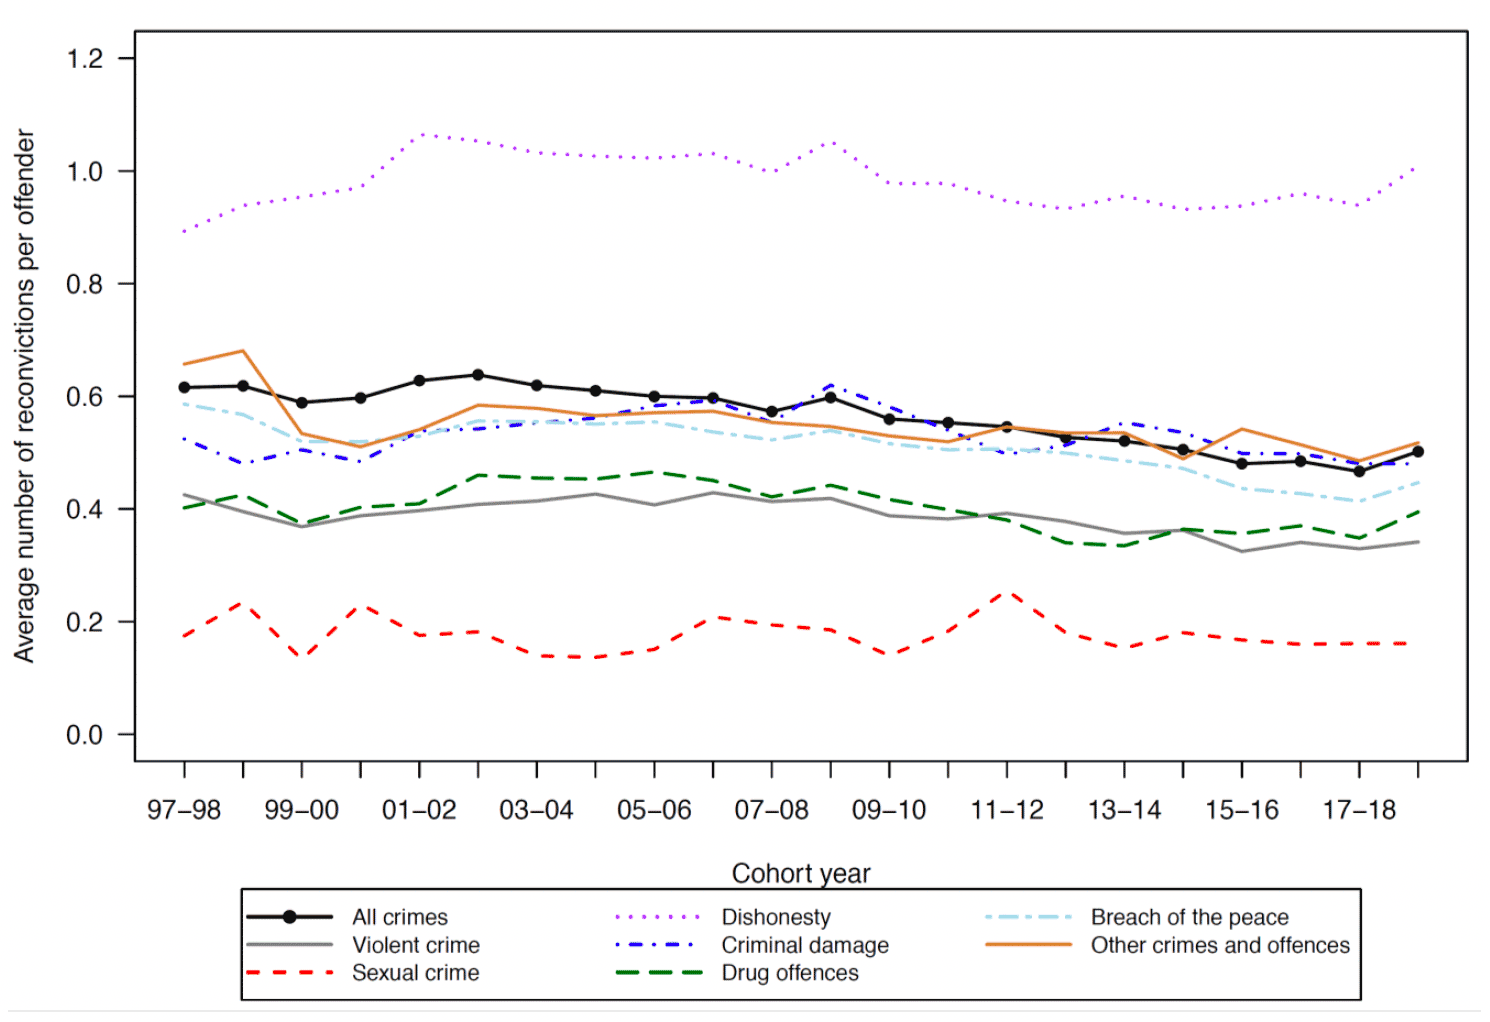 Chart showing the trend in the average number of reconvictions for each crime type between 1997-98 to 2018-19 